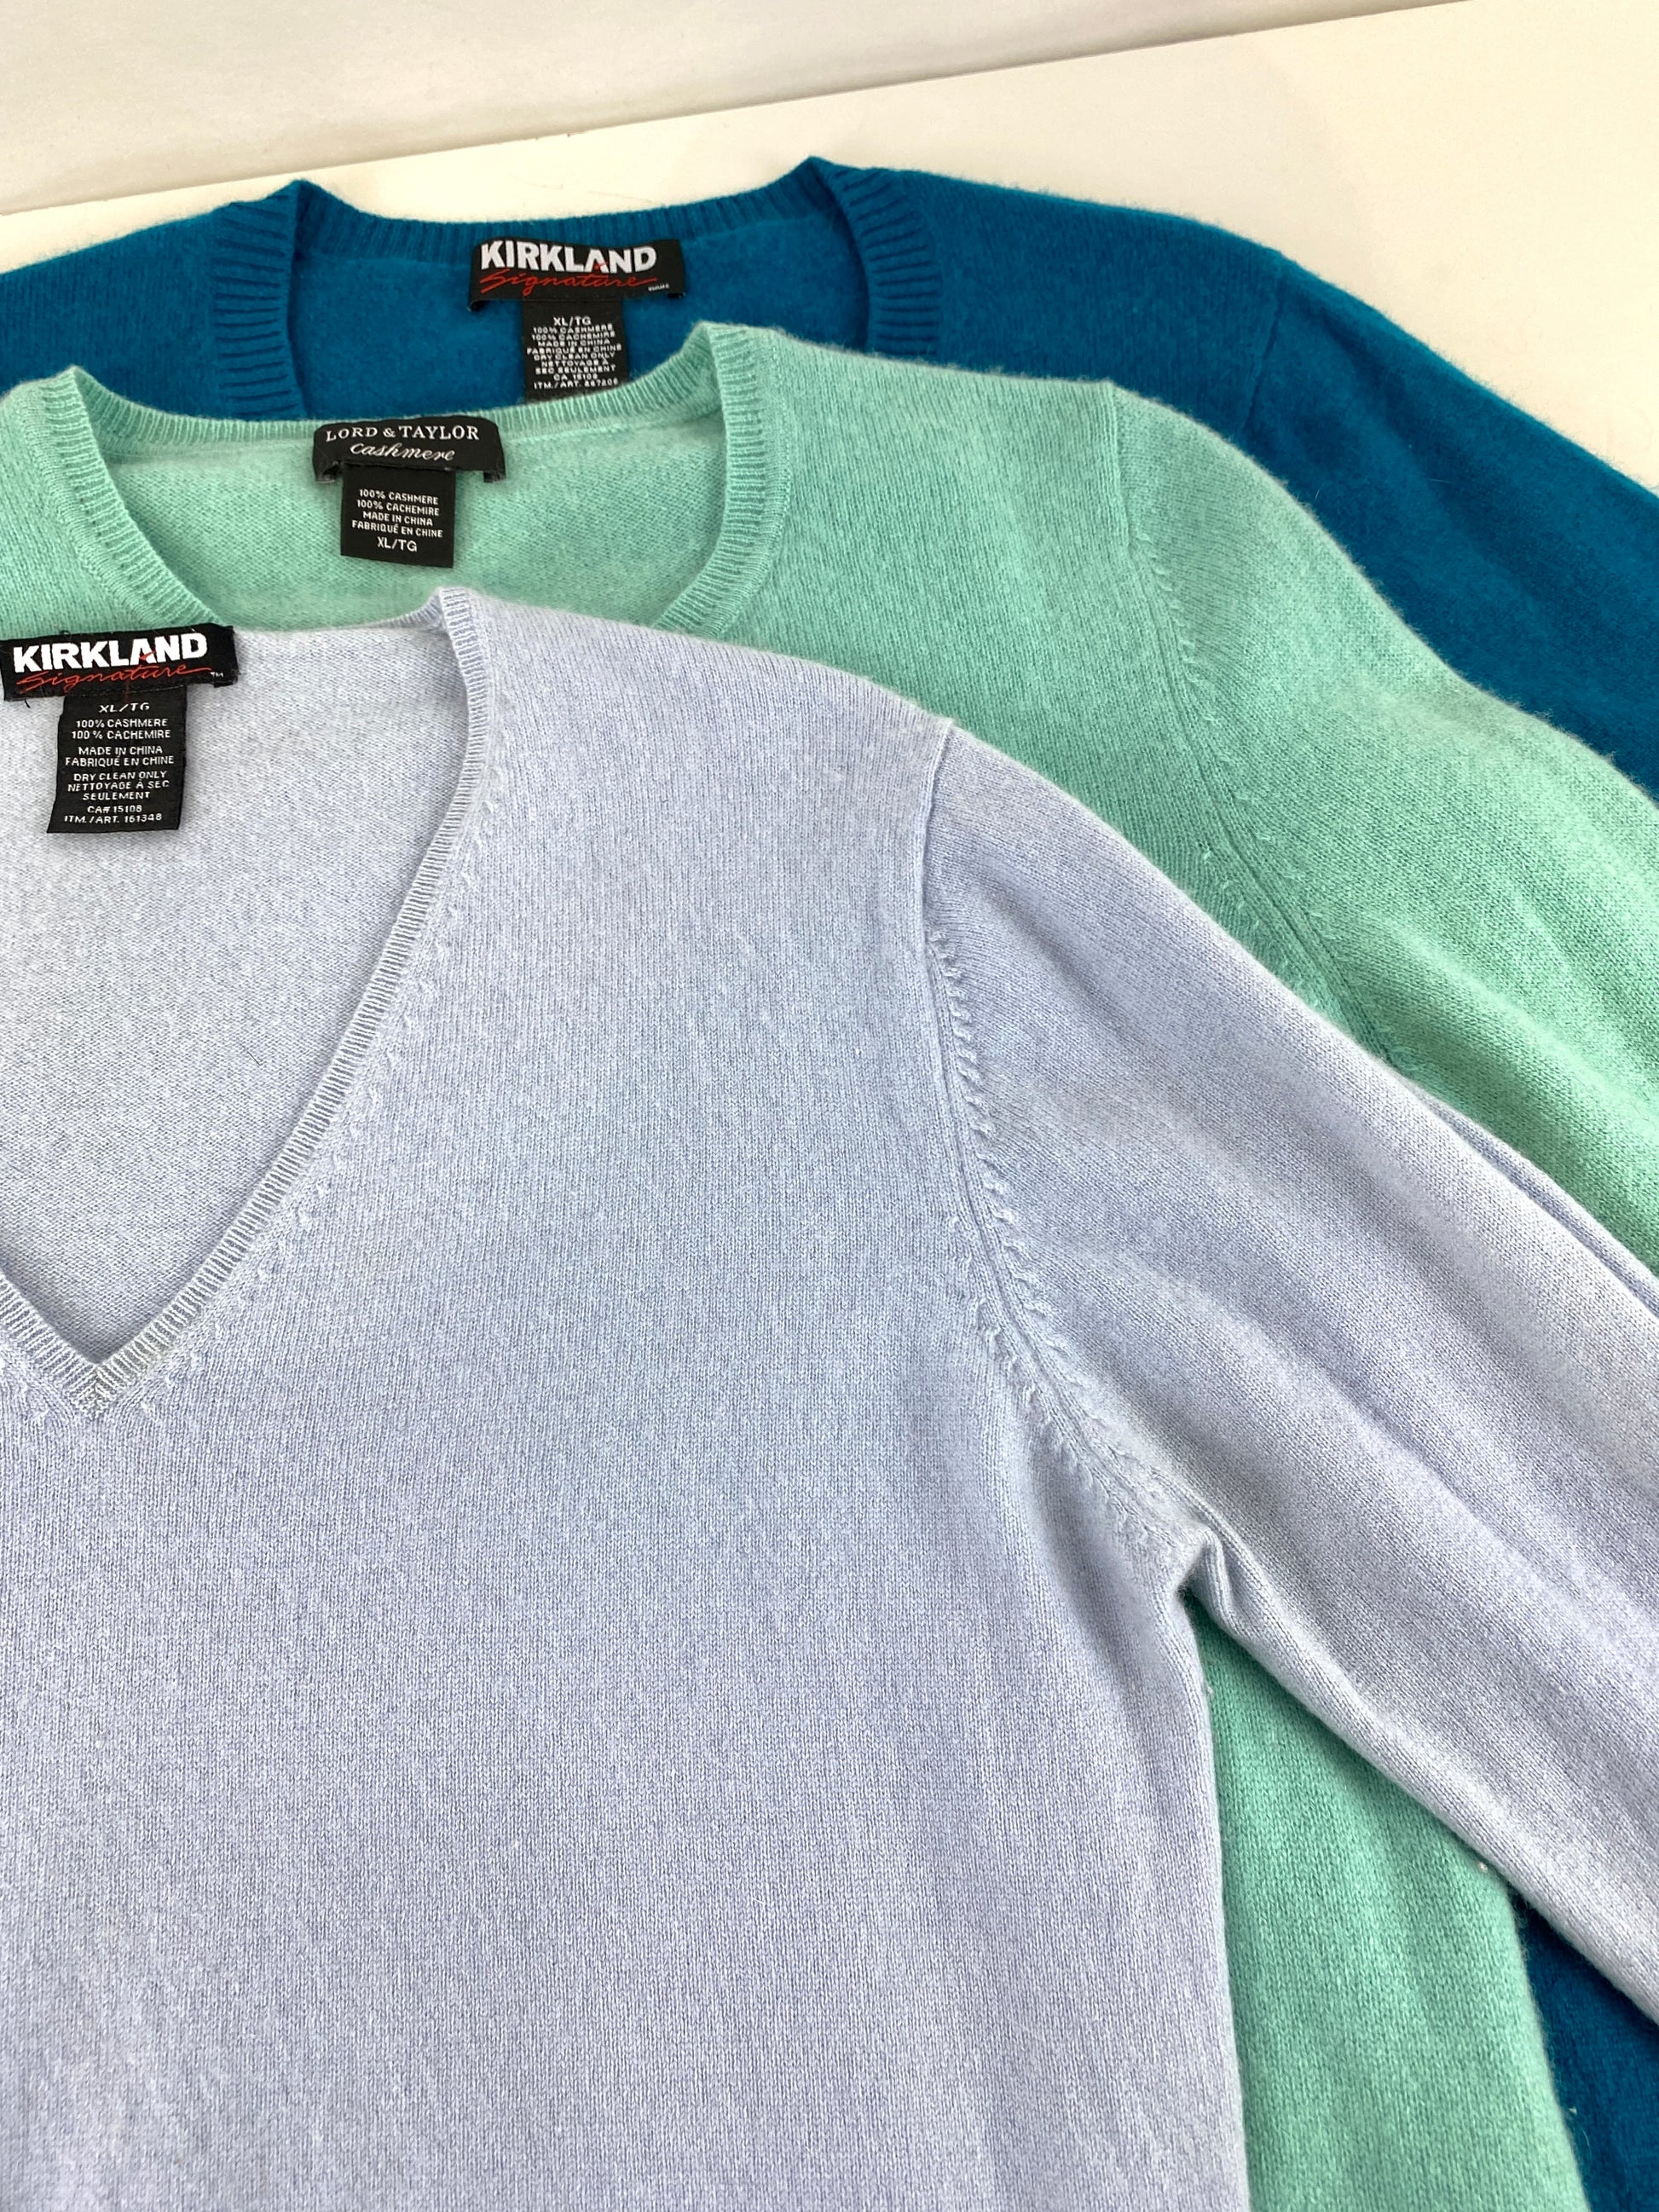 3 cashmere sweater laying flat. teal, blue, mint. Ian Drummond Vintage.